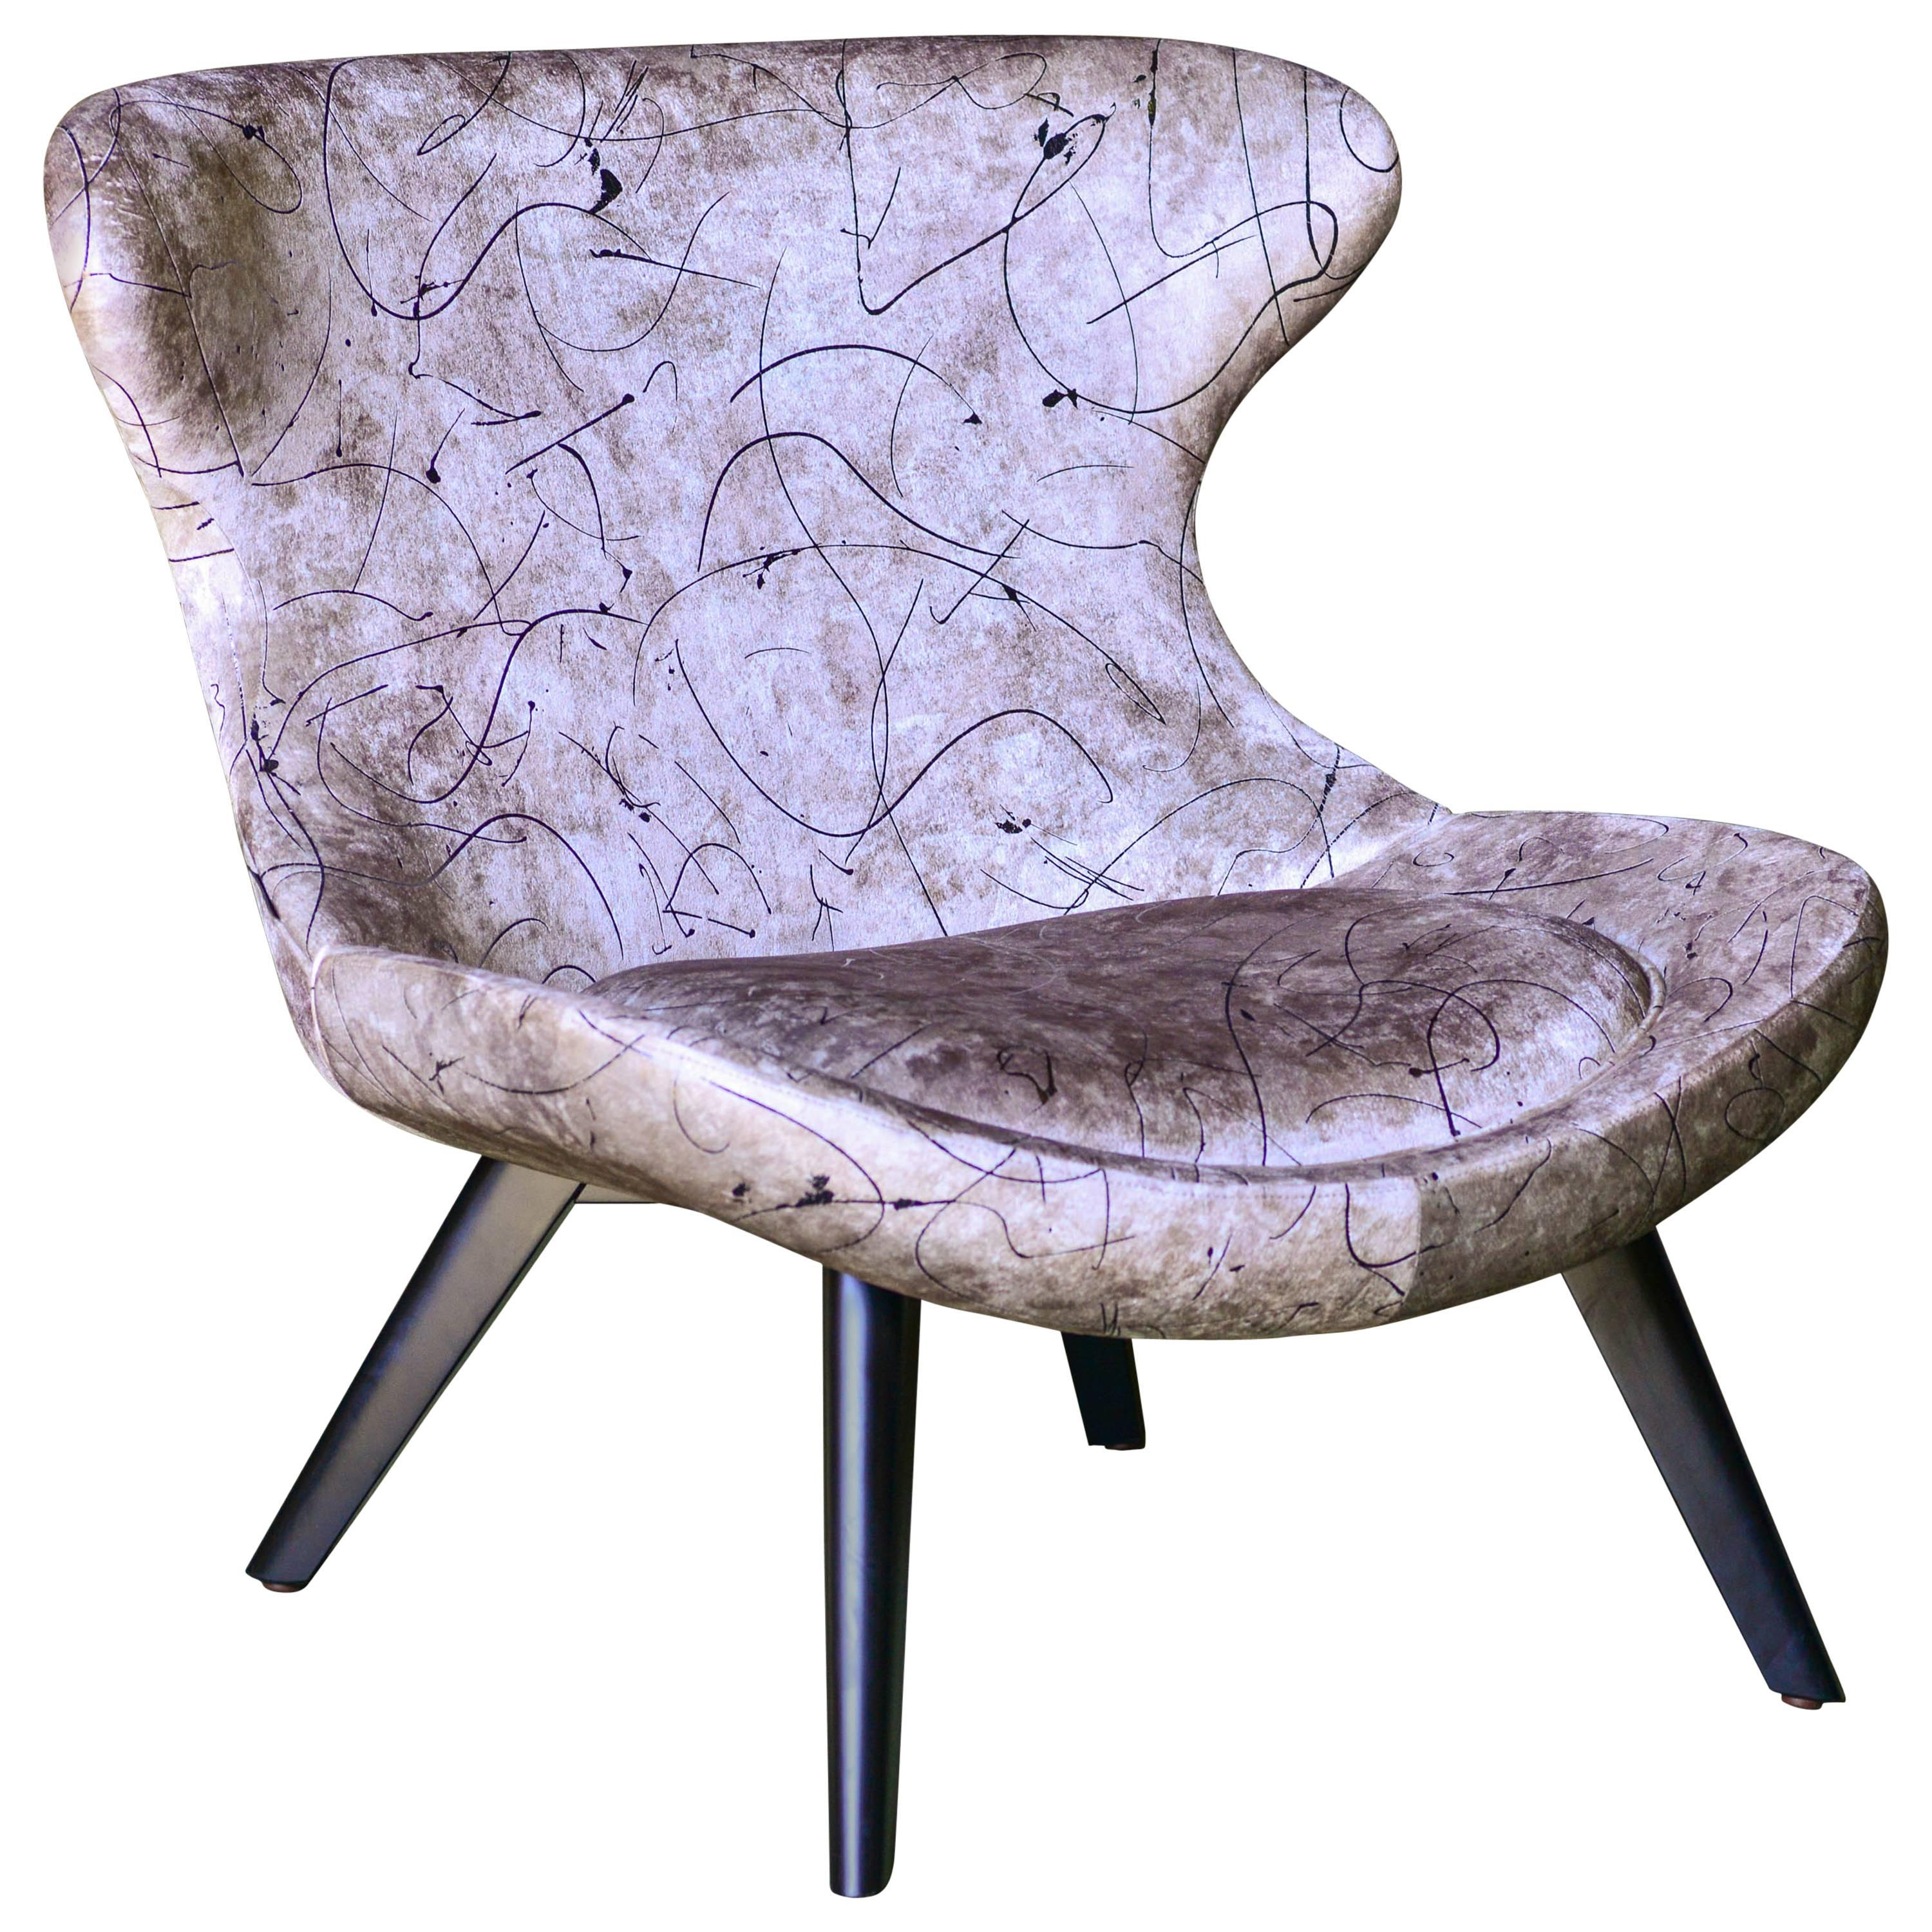 A very original lounge chair with modern clean Scandinavian lines and a touch of Space Age retro. Upholstered in European digitally printed velvet with a metallic foil atop, conveying the drama and scale of a modernist artists canvas. Solid wood